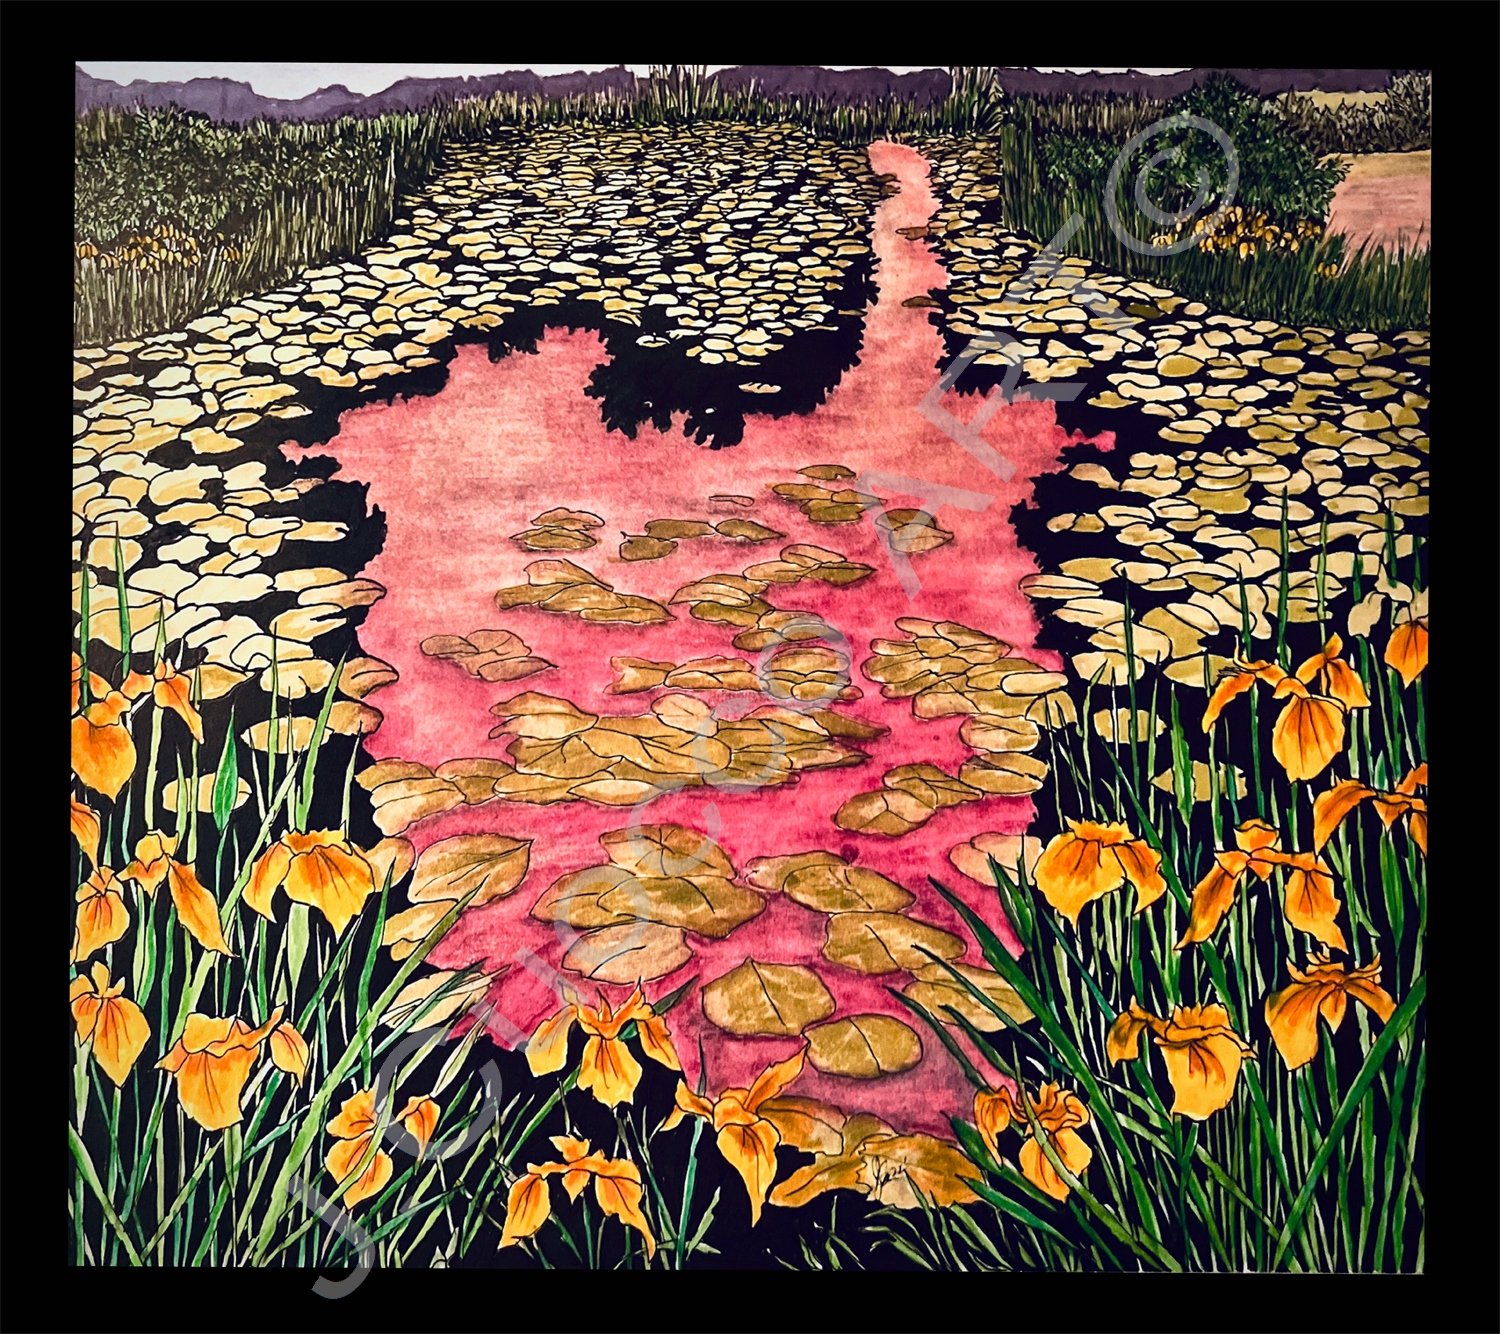 The Pond Lilies